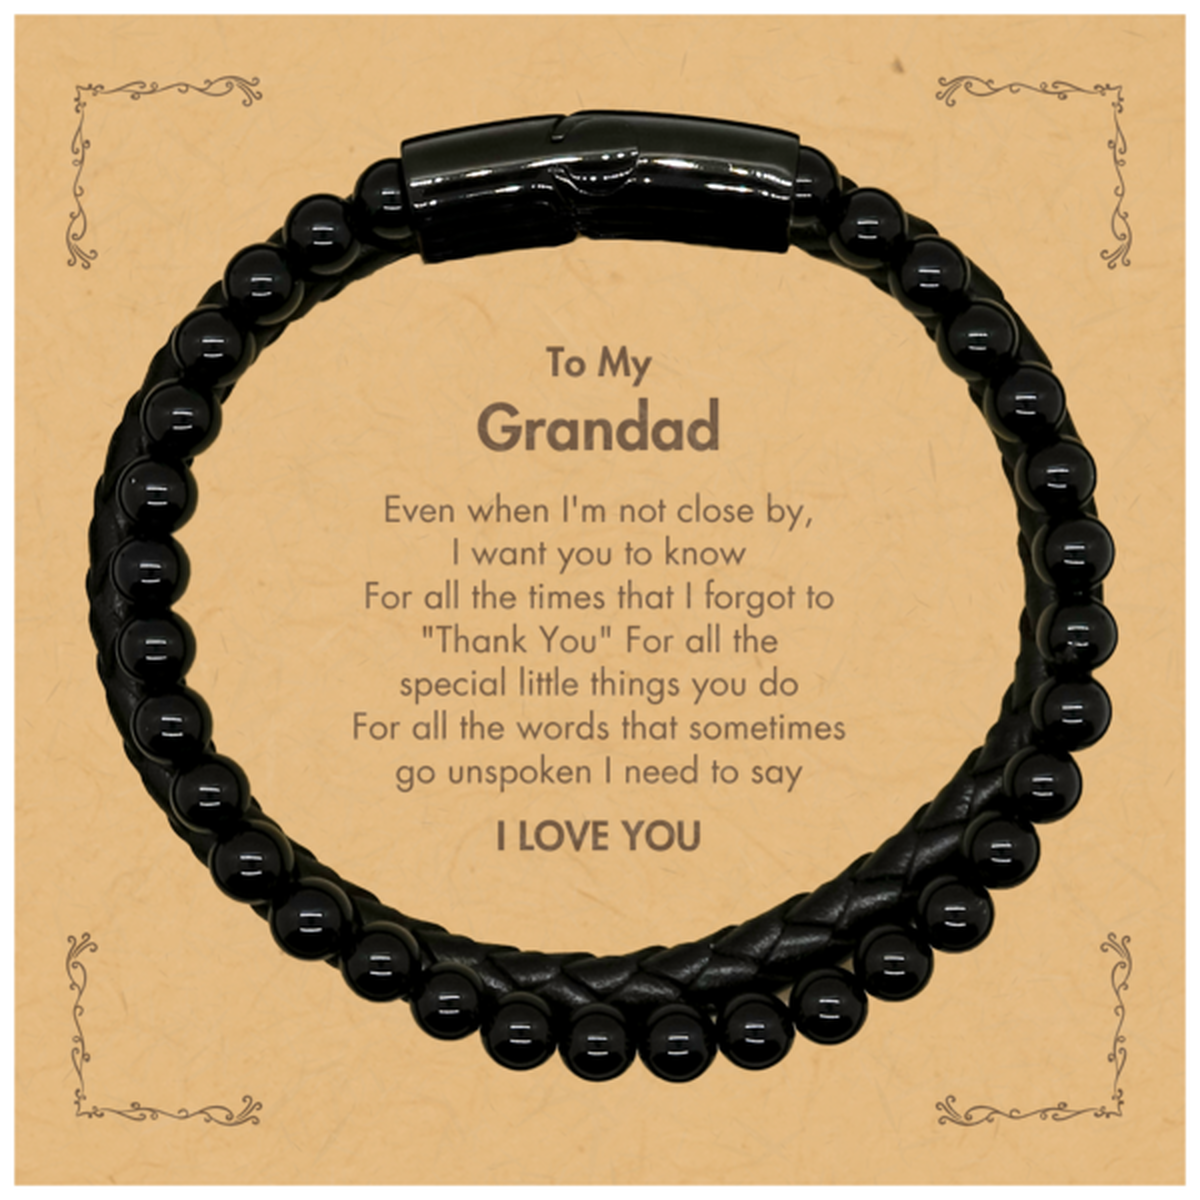 Thank You Gifts for Grandad, Keepsake Stone Leather Bracelets Gifts for Grandad Birthday Mother's day Father's Day Grandad For all the words That sometimes go unspoken I need to say I LOVE YOU